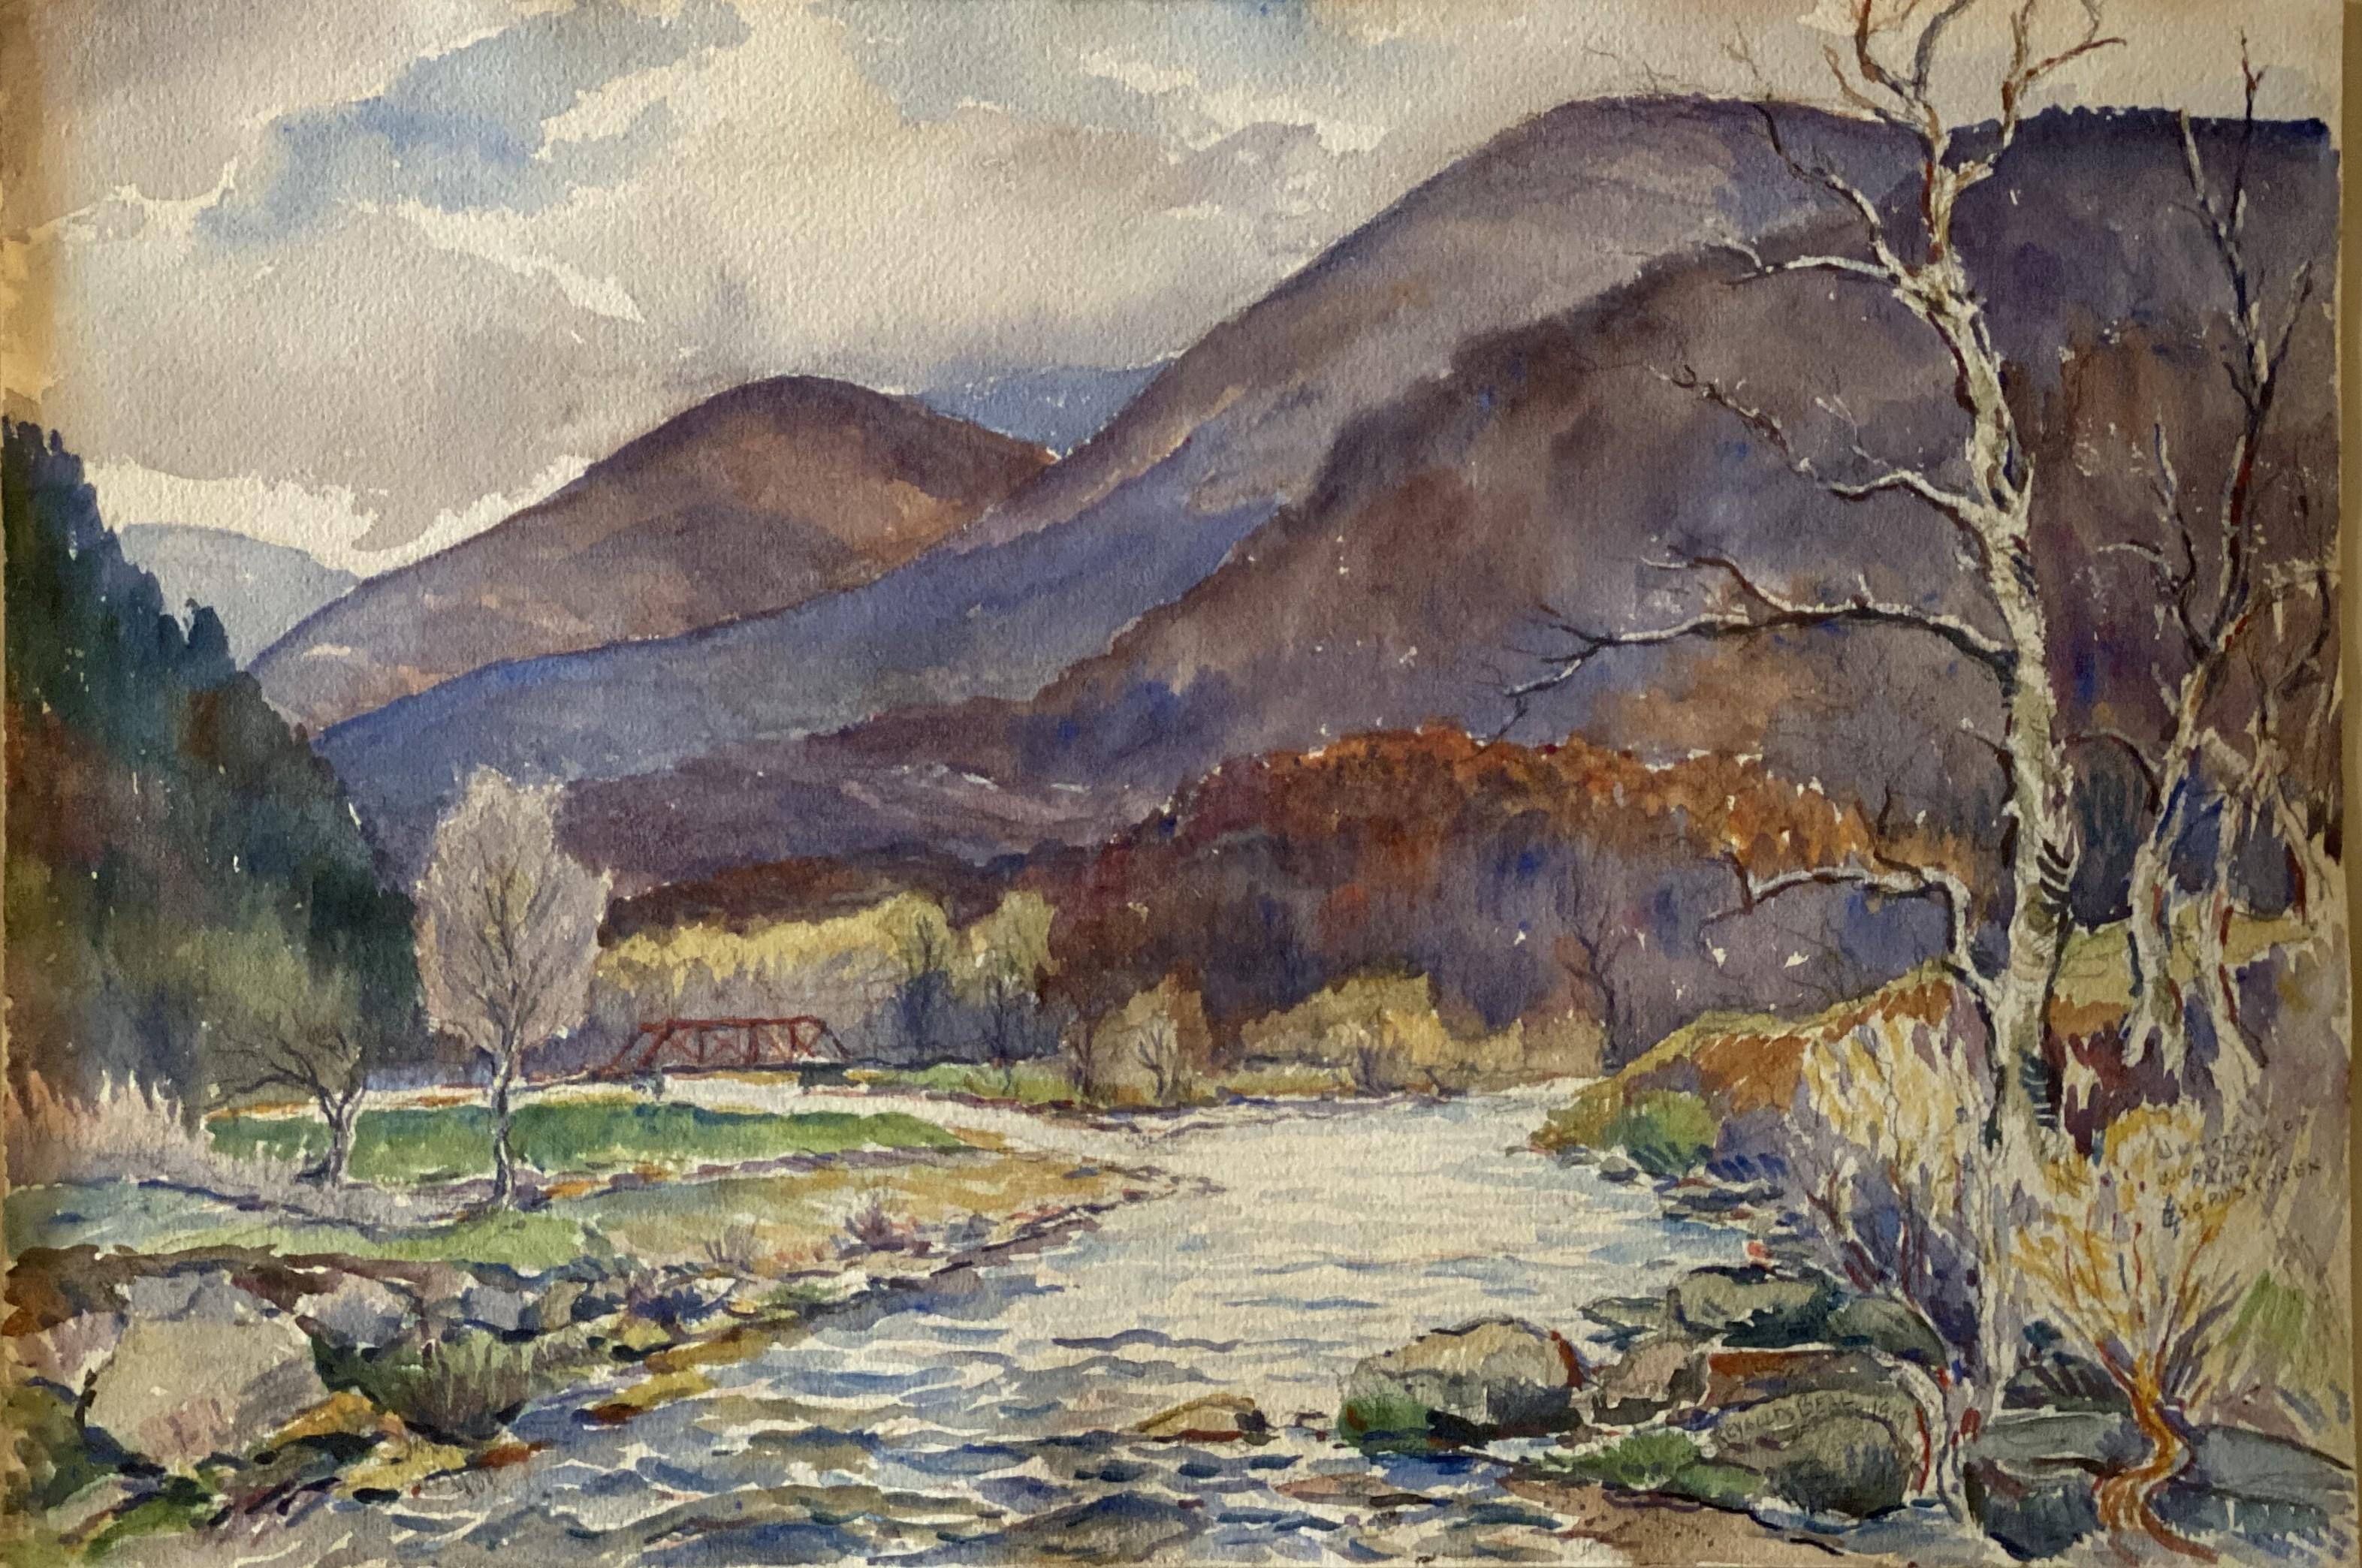 Junction of Woodland and Esopus Creek - Art by Reynolds Beal